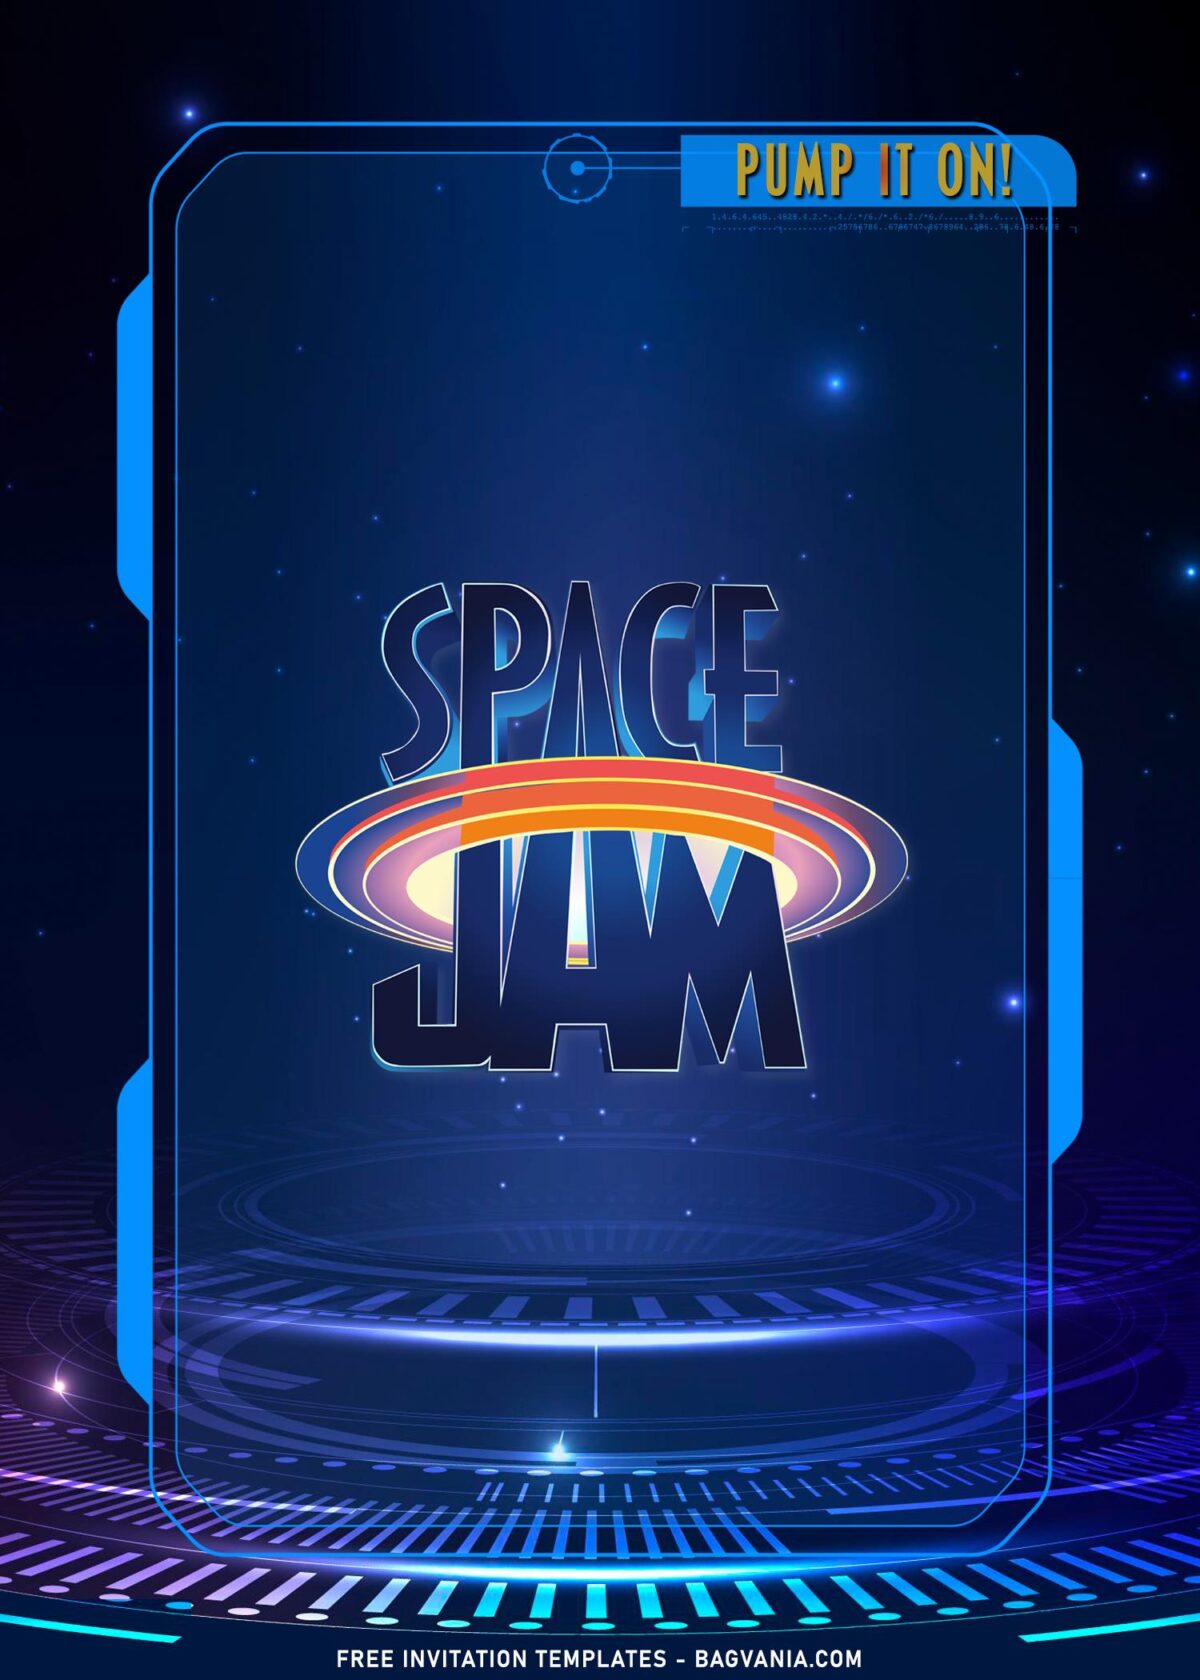 9+ Space Jam Birthday Invitation Templates For Kids Of All Ages with 3d Futuristic background and text box